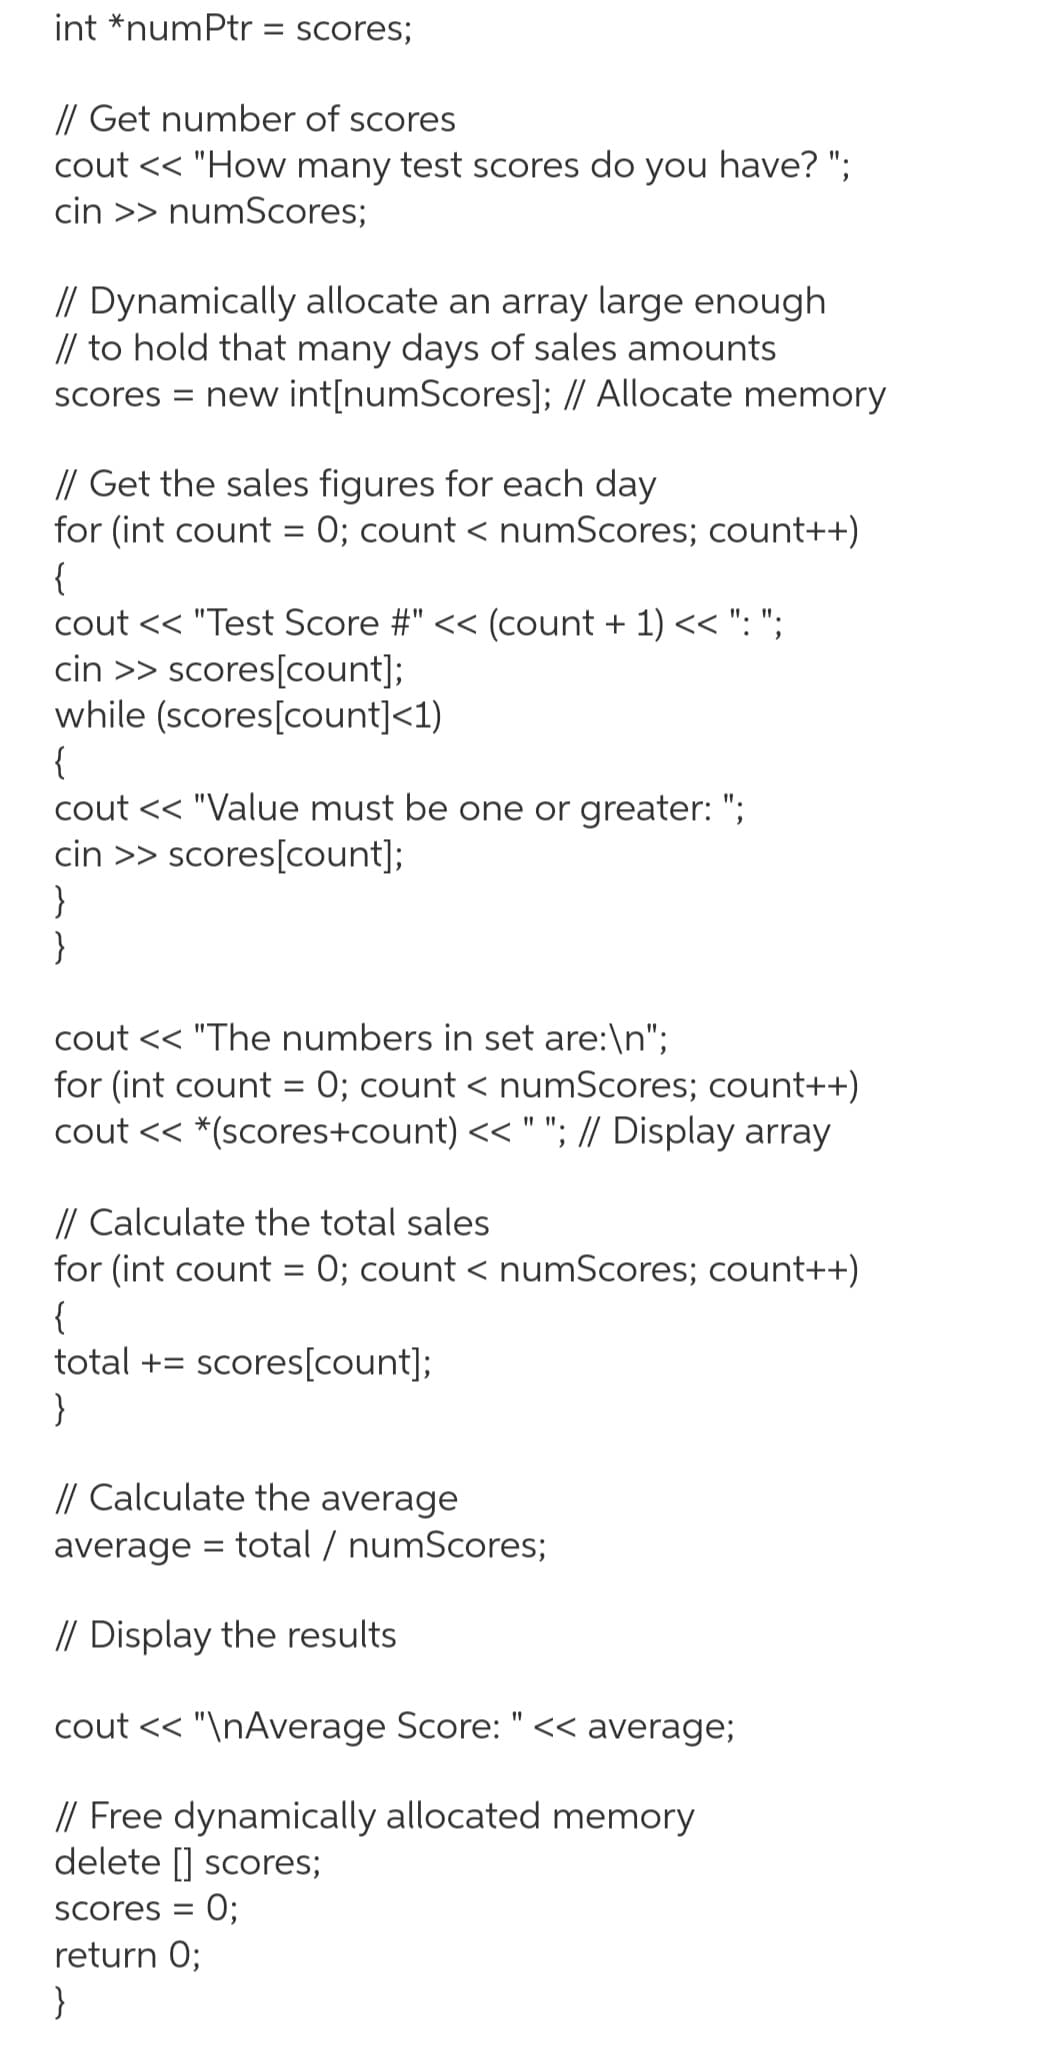 int *numPtr = scores;
// Get number of scores
cout << "How many test scores do you have? ";
cin >> numScores;
// Dynamically allocate an array large enough
// to hold that many days of sales amounts
scores = new int[numScores]; // Allocate memory
// Get the sales figures for each day
for (int count = 0; count < numScores; count++)
{
cout << "Test Score #" << (count + 1) << ": ";
cin >> scores[count];
while (scores[count]<1)
{
cout << "Value must be one or greater: ";
cin >> scores[count];
}
}
cout << "The numbers in set are:\n";
for (int count = 0; count < numScores; count++)
cout << *(scores+count) << " "; // Display array
// Calculate the total sales
for (int count = 0; count < numScores; count++)
{
total + scores[count];
}
// Calculate the average
average total / numScores;
// Display the results
cout << "\nAverage Score: " << average;
// Free dynamically allocated memory
delete [] scores;
scores = 0;
return 0;
}
=